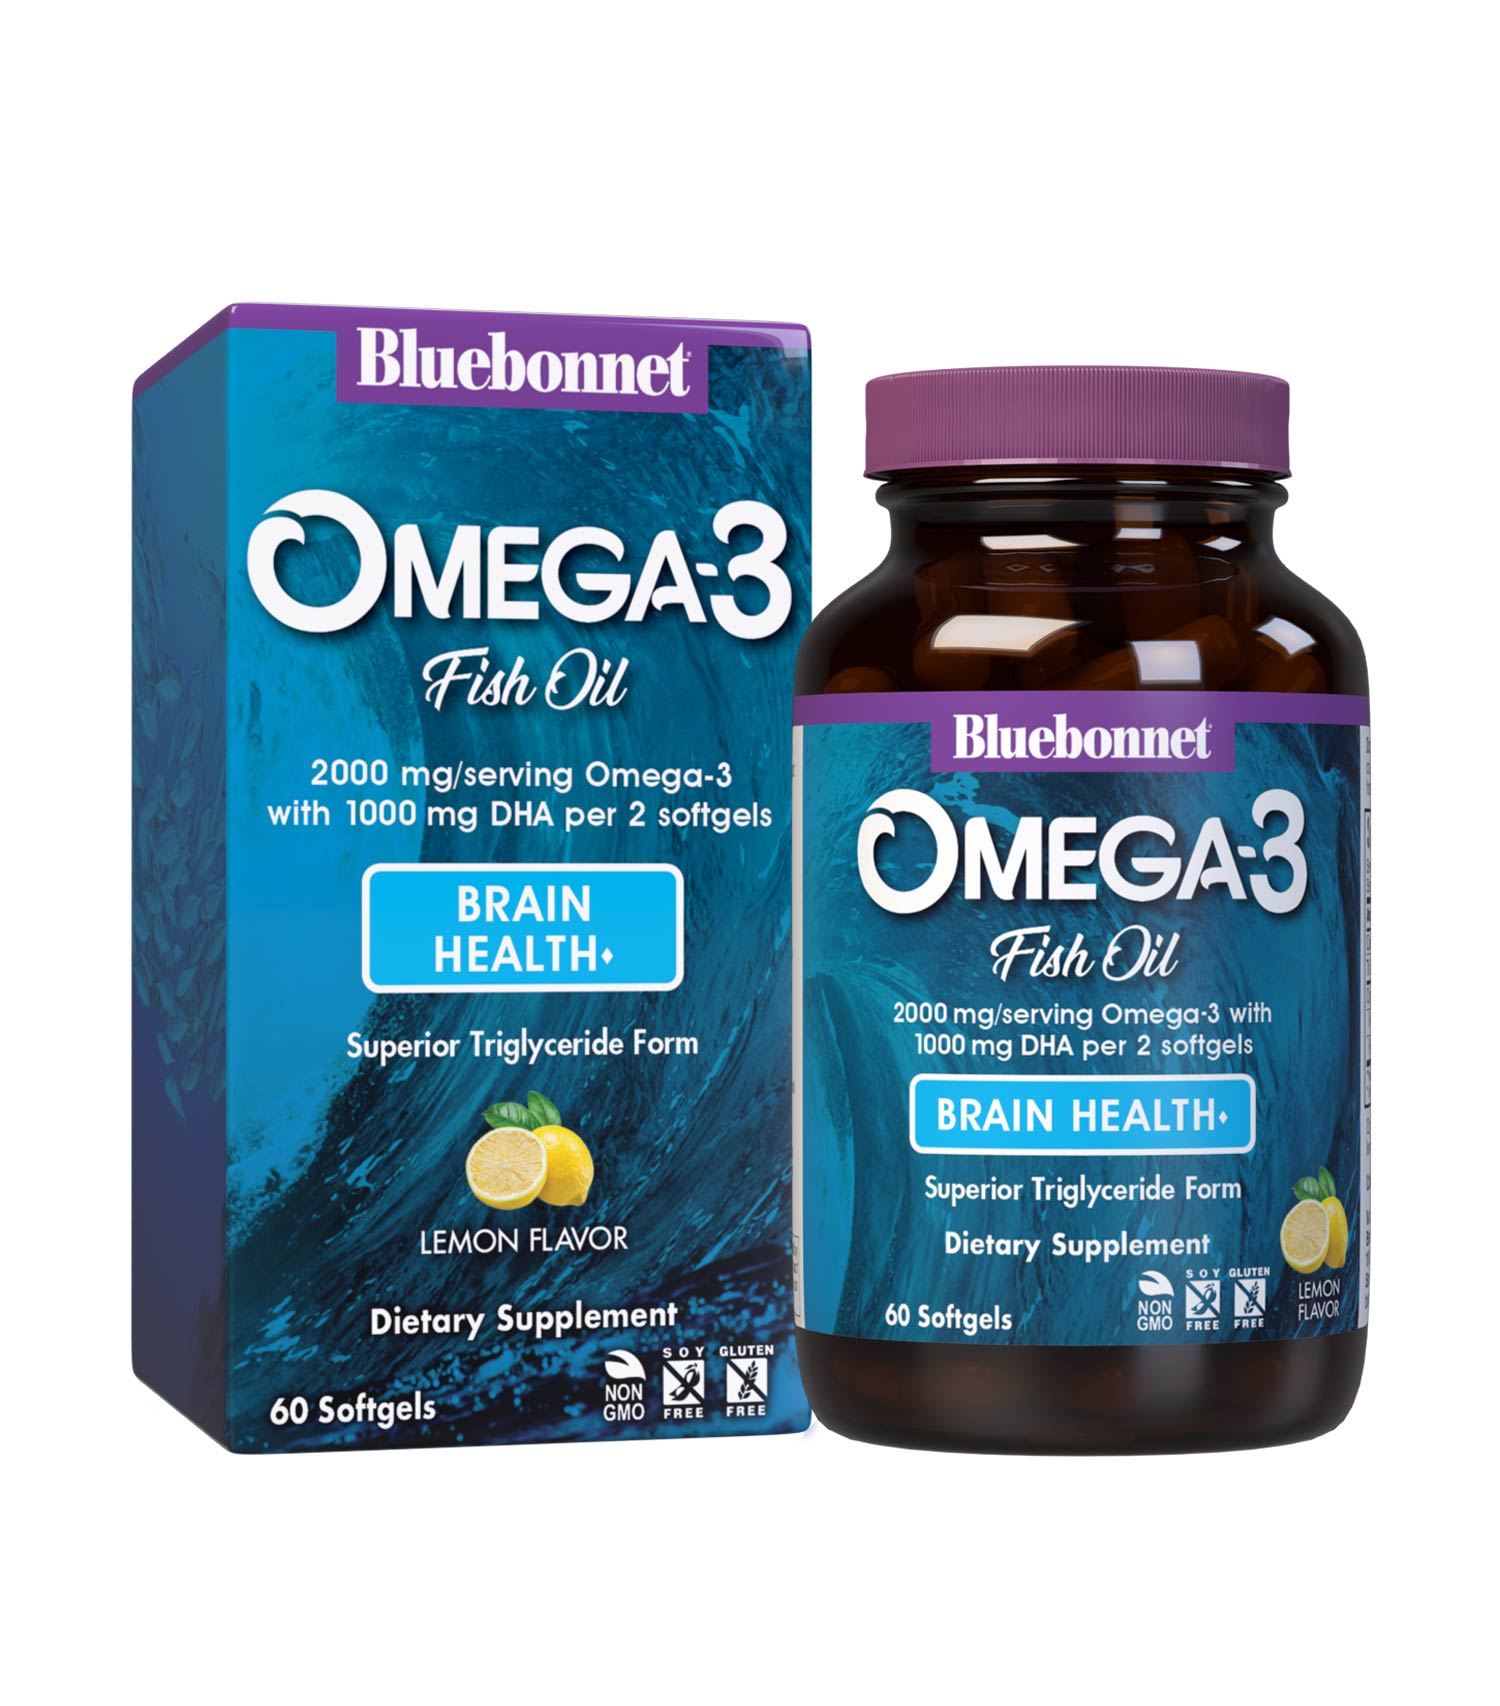 Bluebonnet’s Omega-3 Fish Oil Brain Health 60 Softgels are formulated with a specific ratio of DHA and EPA to help support brain function, mood, and focus by utilizing ultra-refined omega-3s from wild-caught fish. With box. #size_60 count